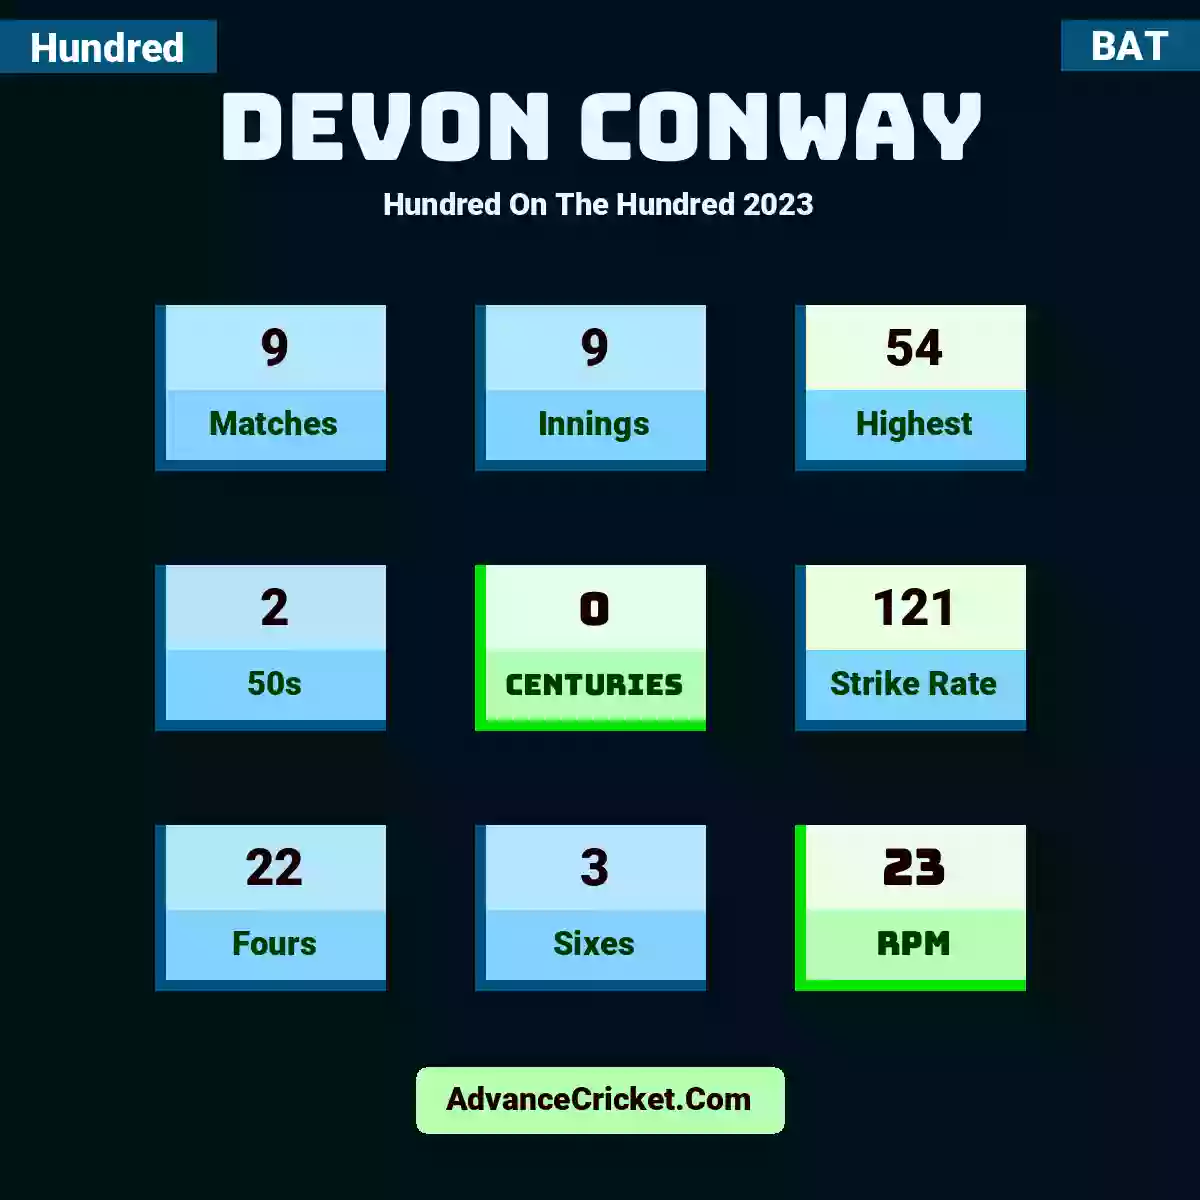 Devon Conway Hundred  On The Hundred 2023, Devon Conway played 9 matches, scored 54 runs as highest, 2 half-centuries, and 0 centuries, with a strike rate of 121. D.Conway hit 22 fours and 3 sixes, with an RPM of 23.